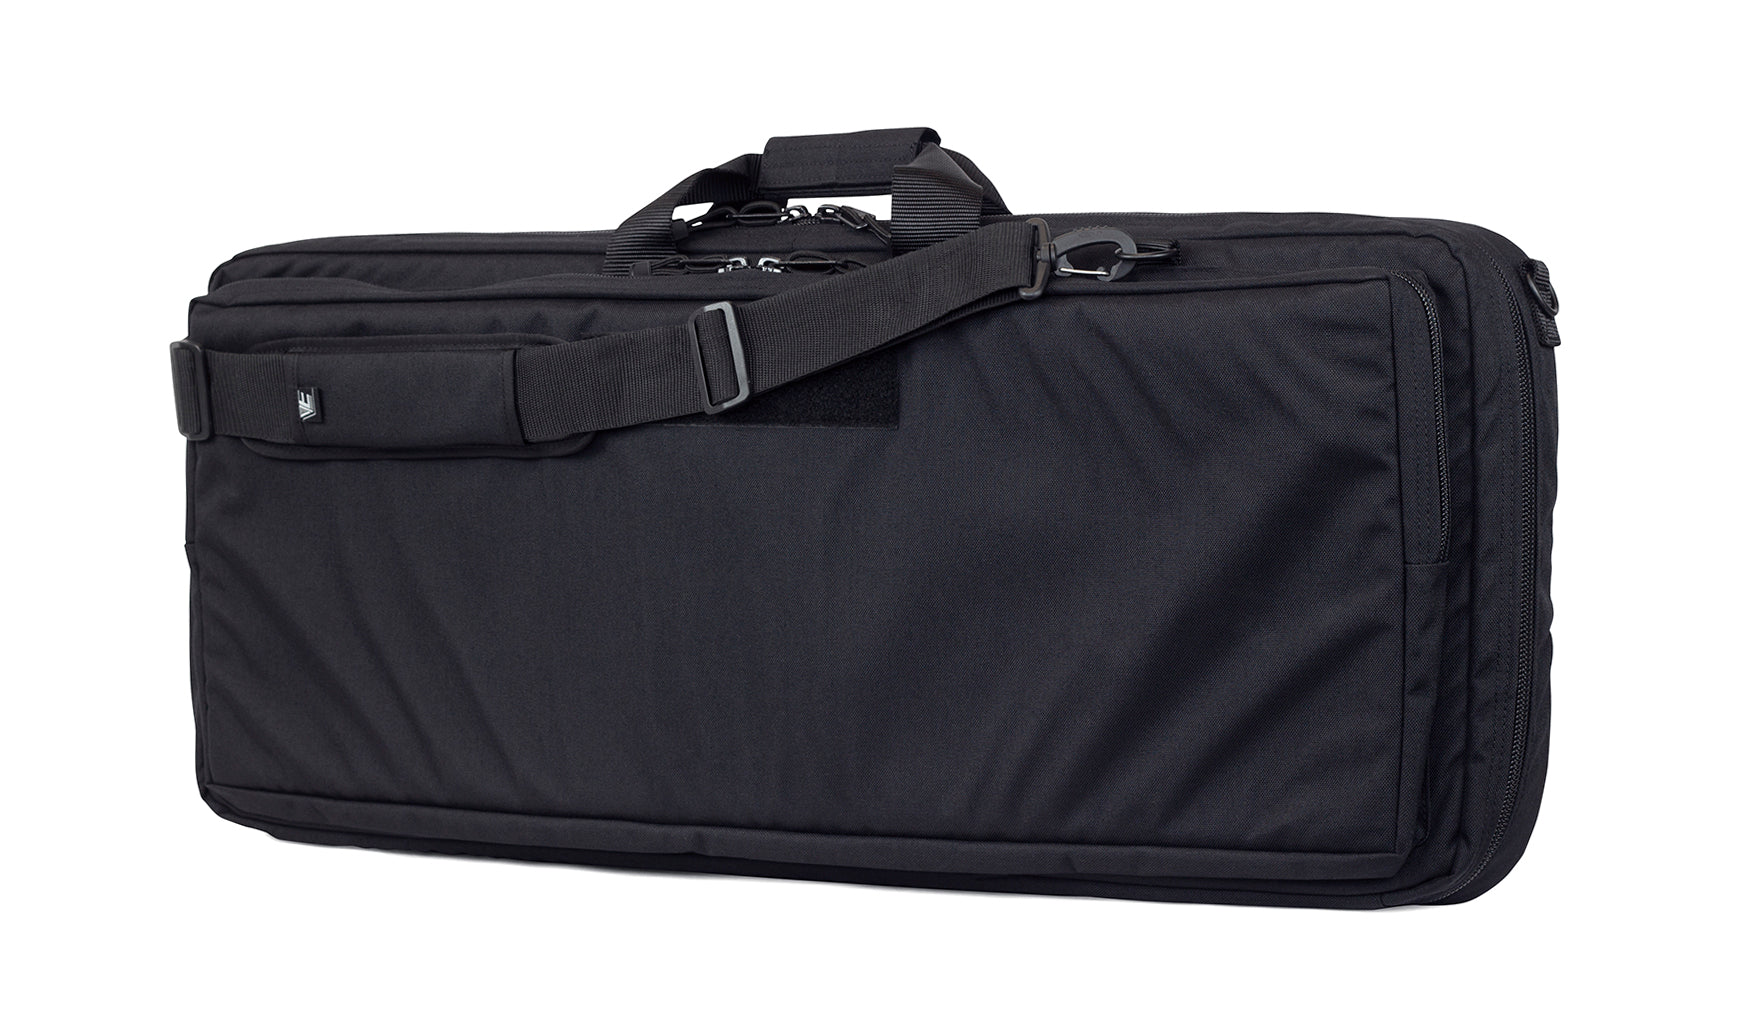 Discreet rifle case with exterior pocket and shoulder strap